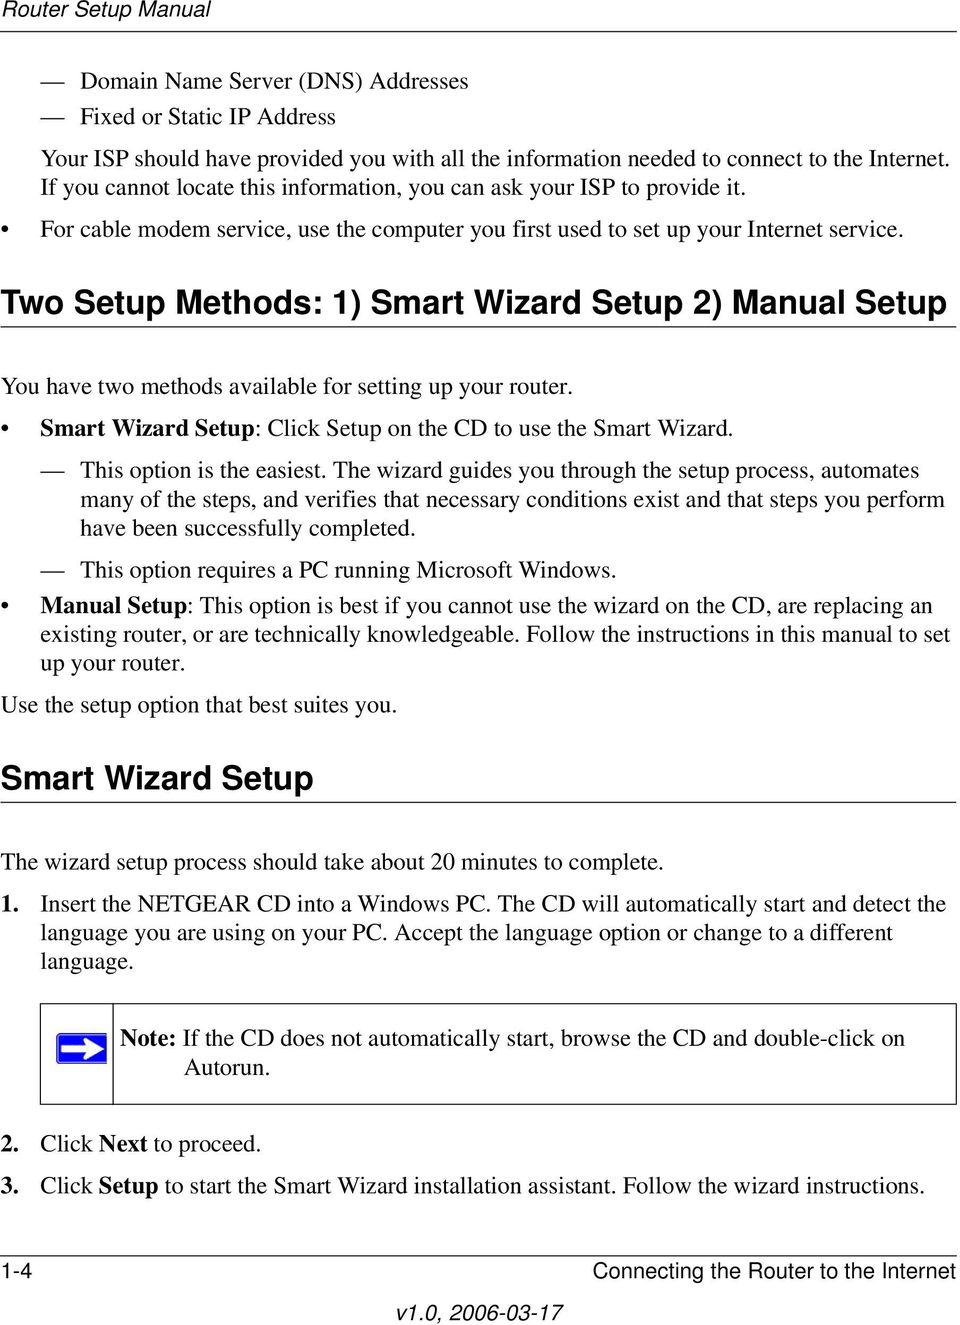 Two Setup Methods: 1) Smart Wizard Setup 2) Manual Setup You have two methods available for setting up your router. Smart Wizard Setup: Click Setup on the CD to use the Smart Wizard.